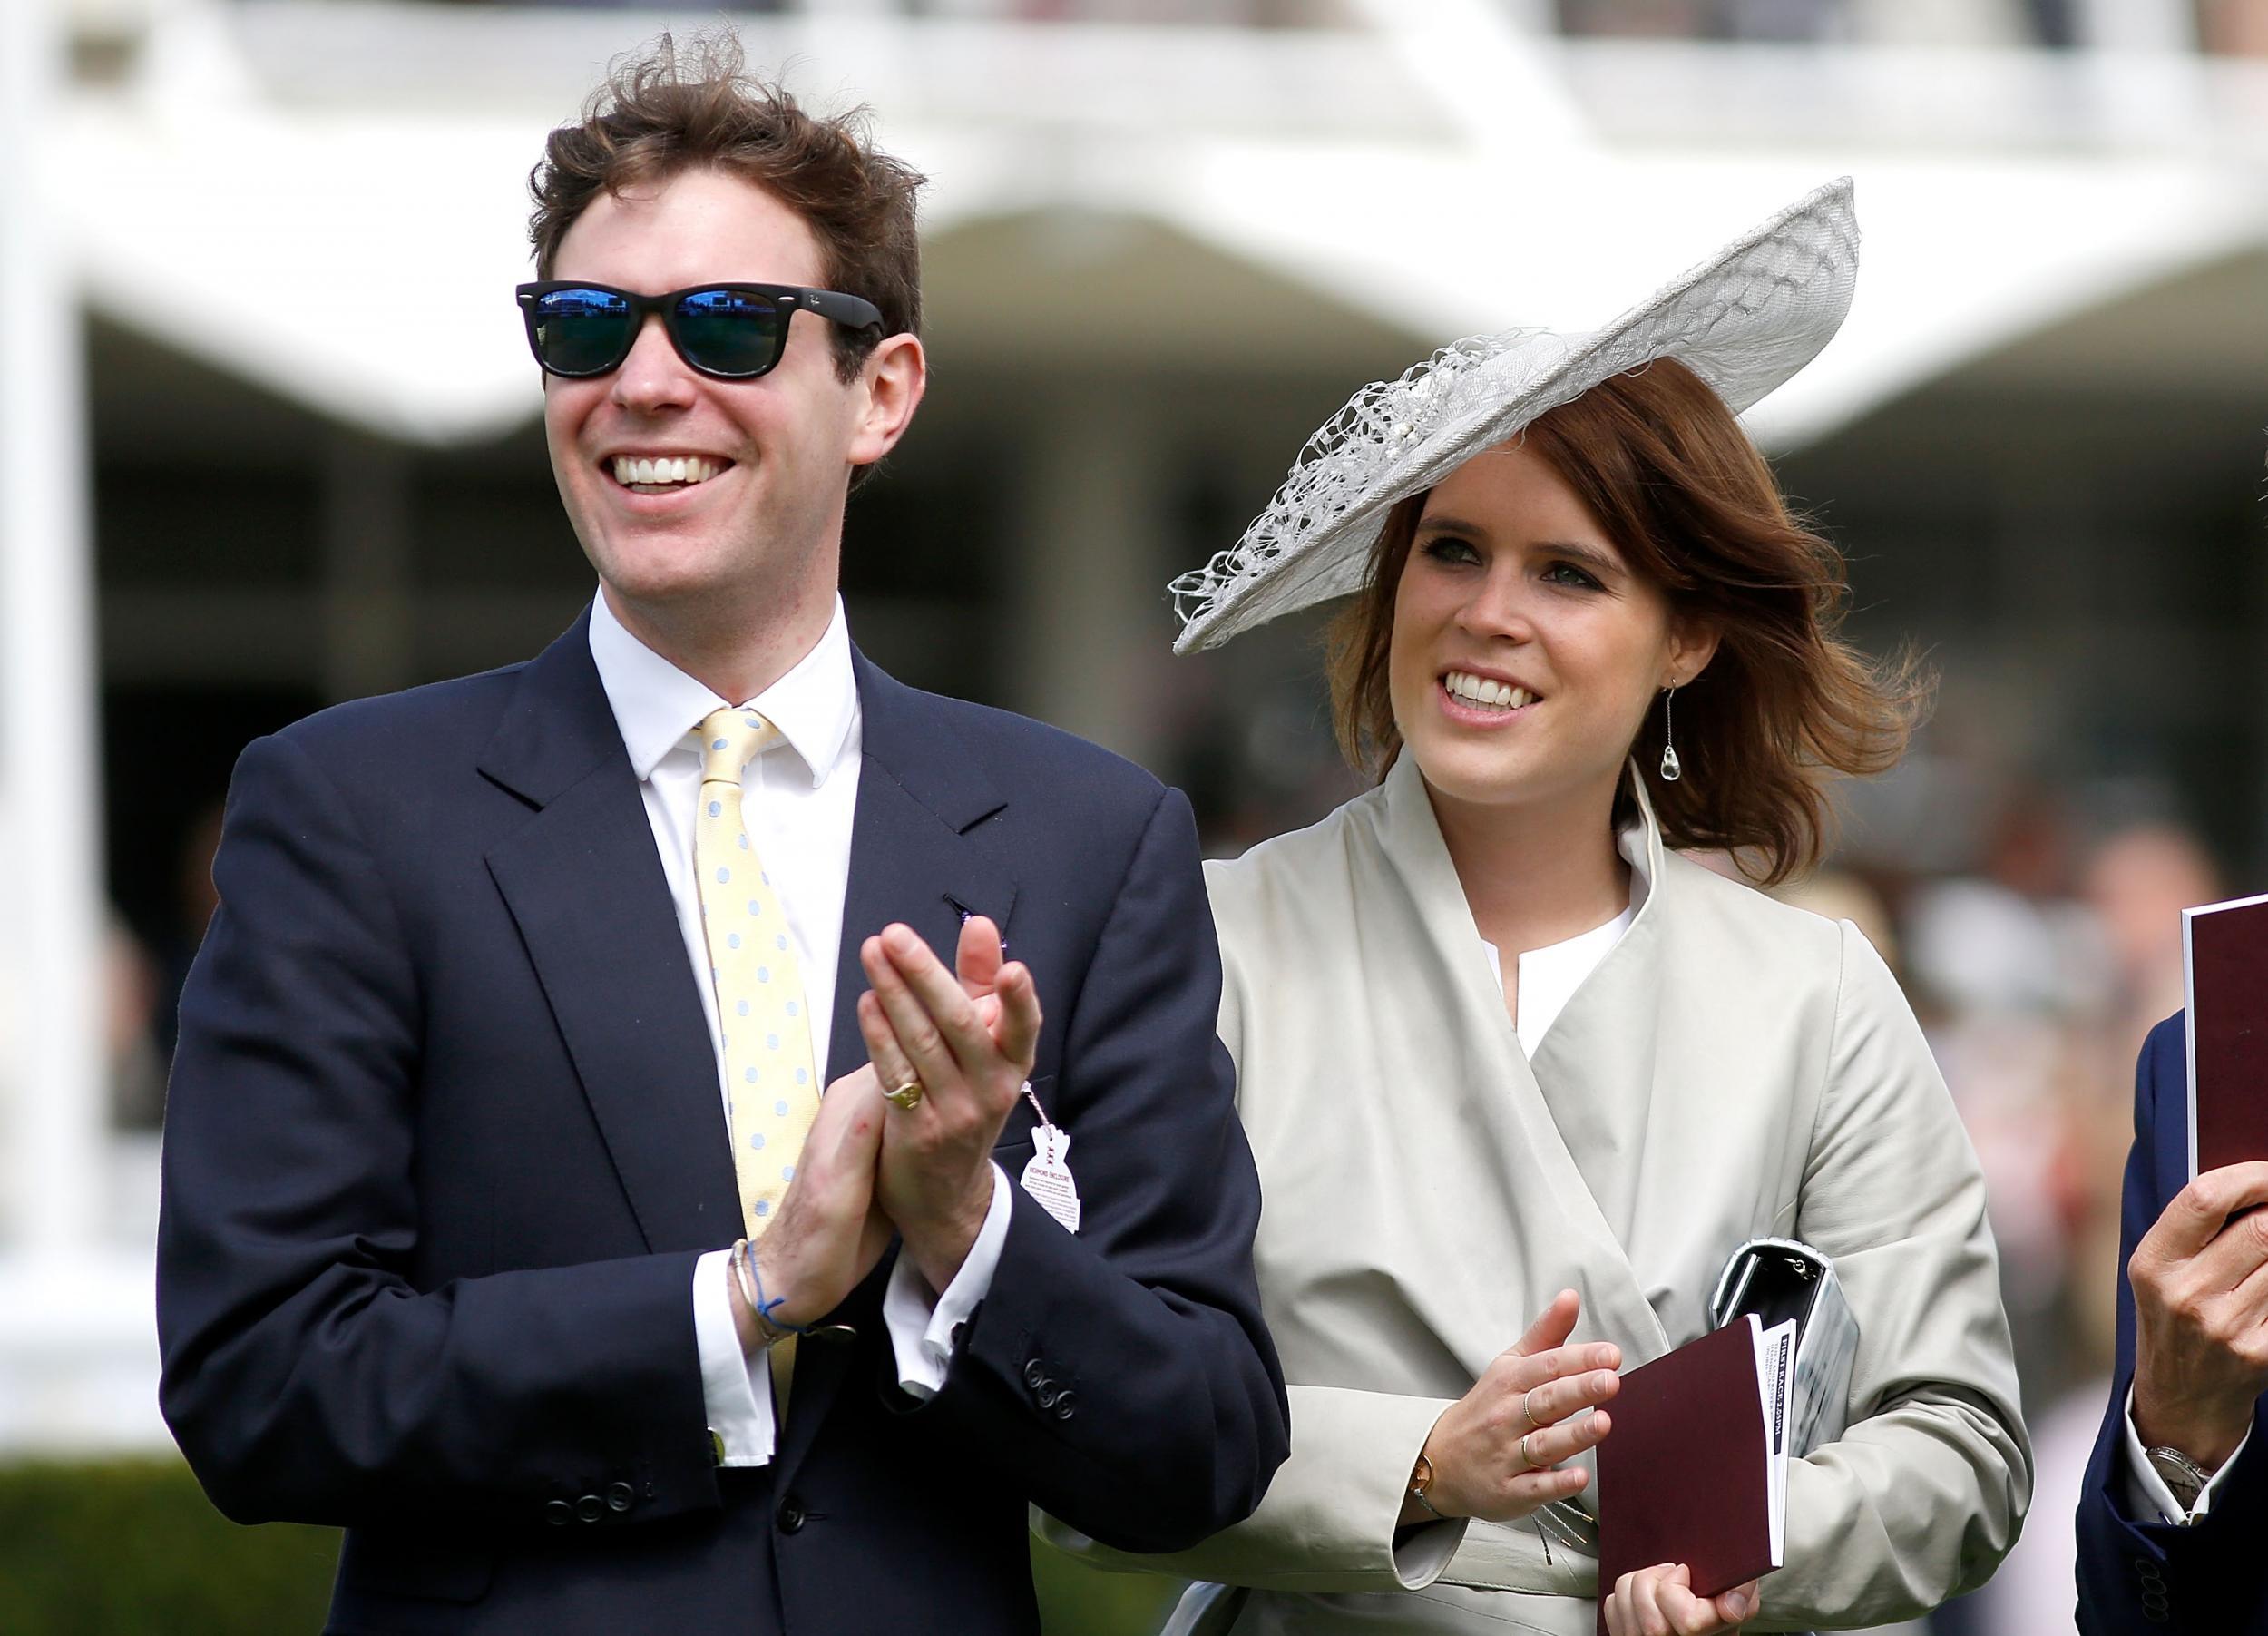 Princess Eugenie, 27, began dating Mr Brooksbank roughly seven years ago after they met while skiing in the Swiss resort of Verbier